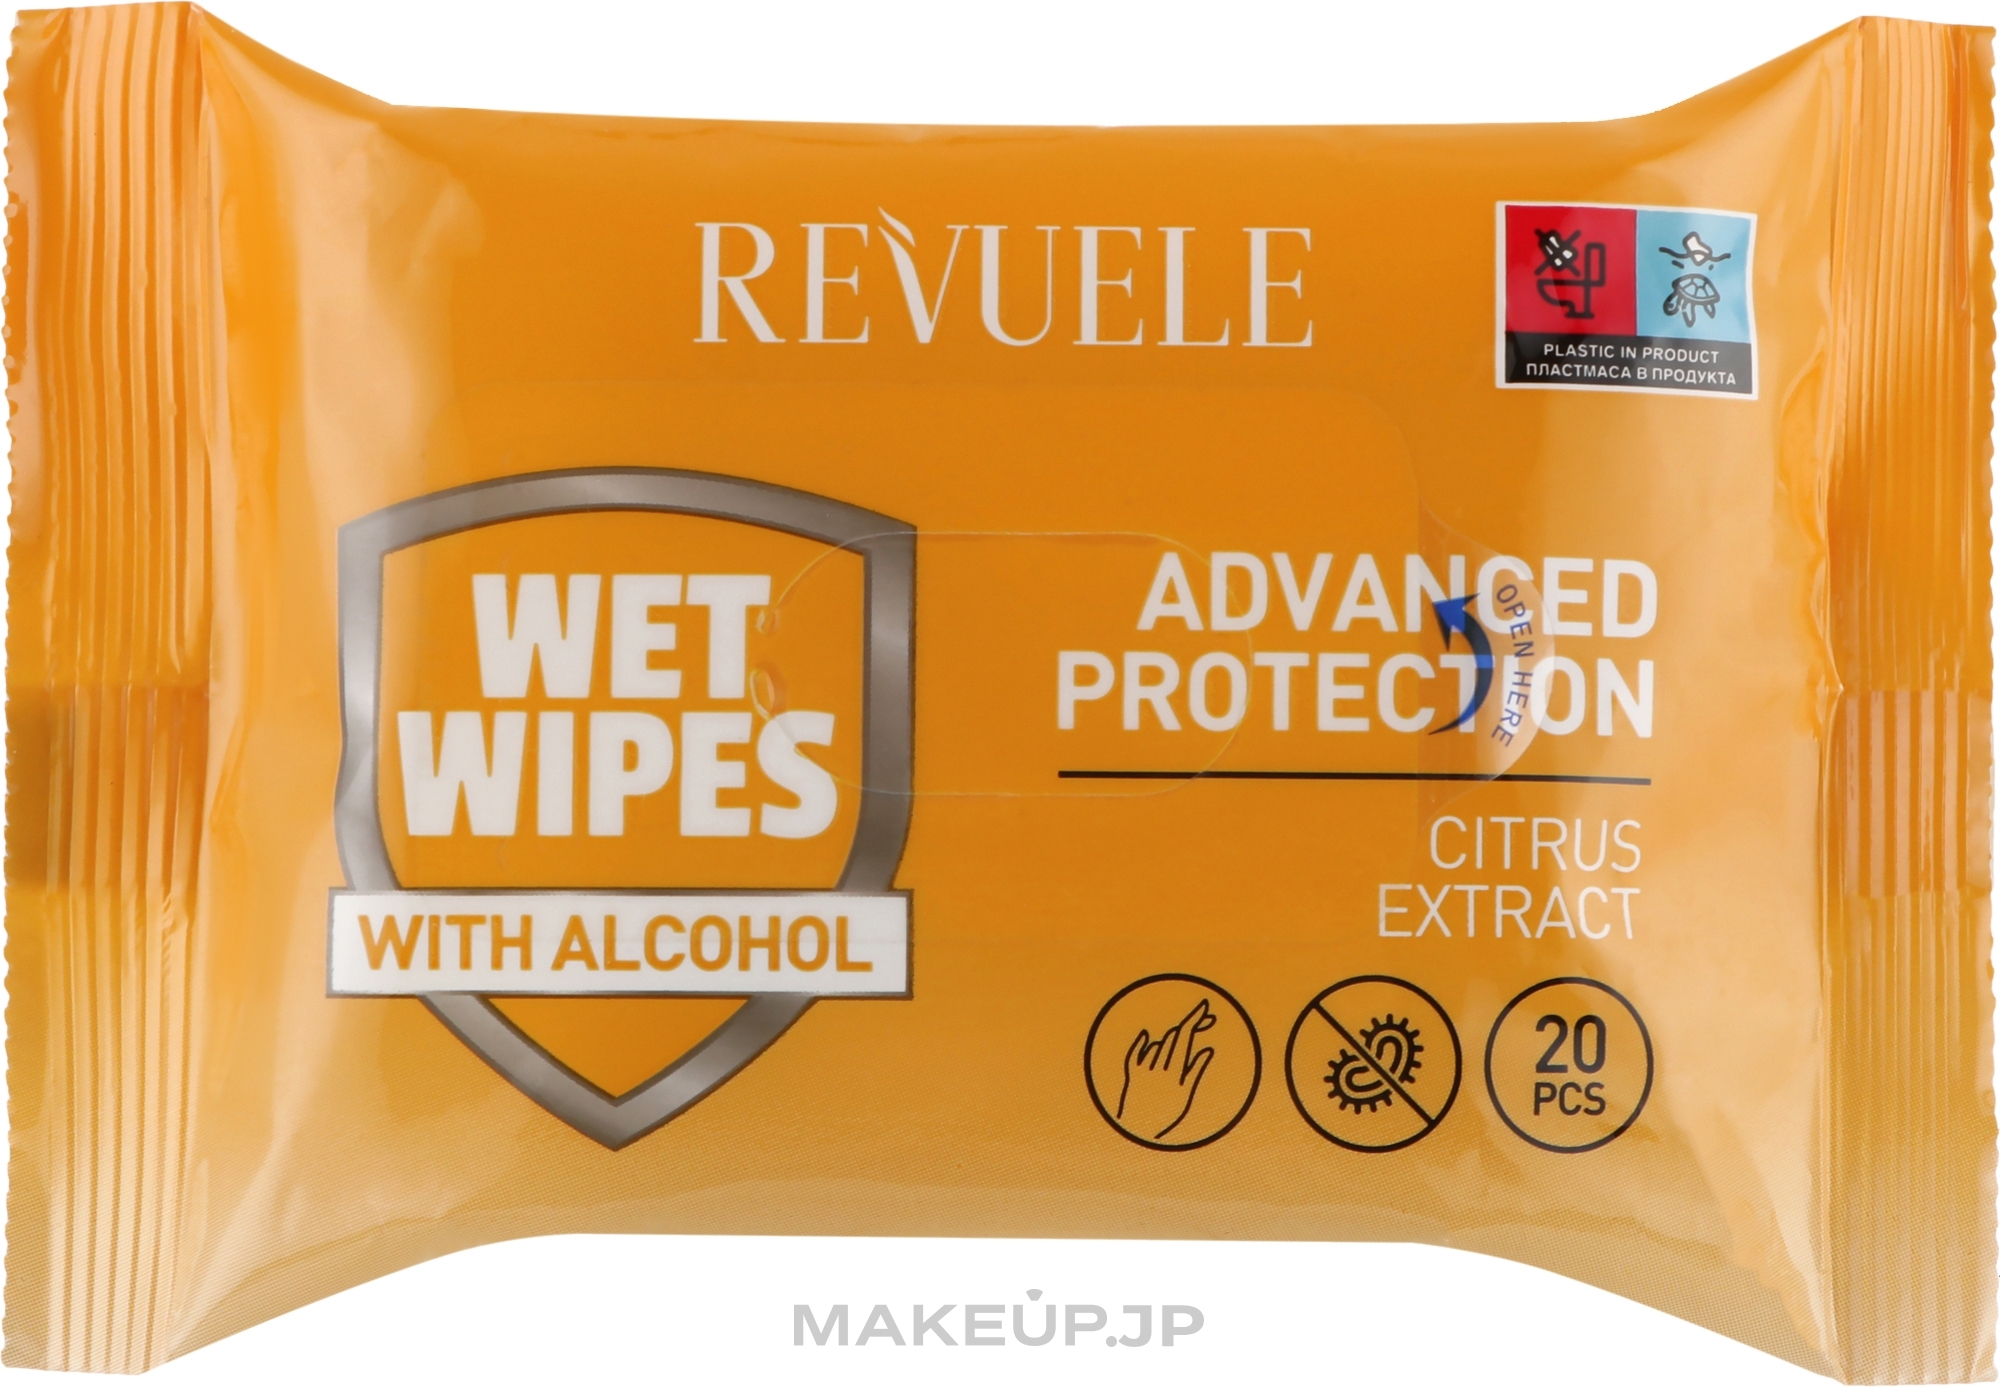 Wet Wipes with Citrus Extract - Revuele Advanced Protection Wet Wipes Citrus Extracts — photo 20 szt.